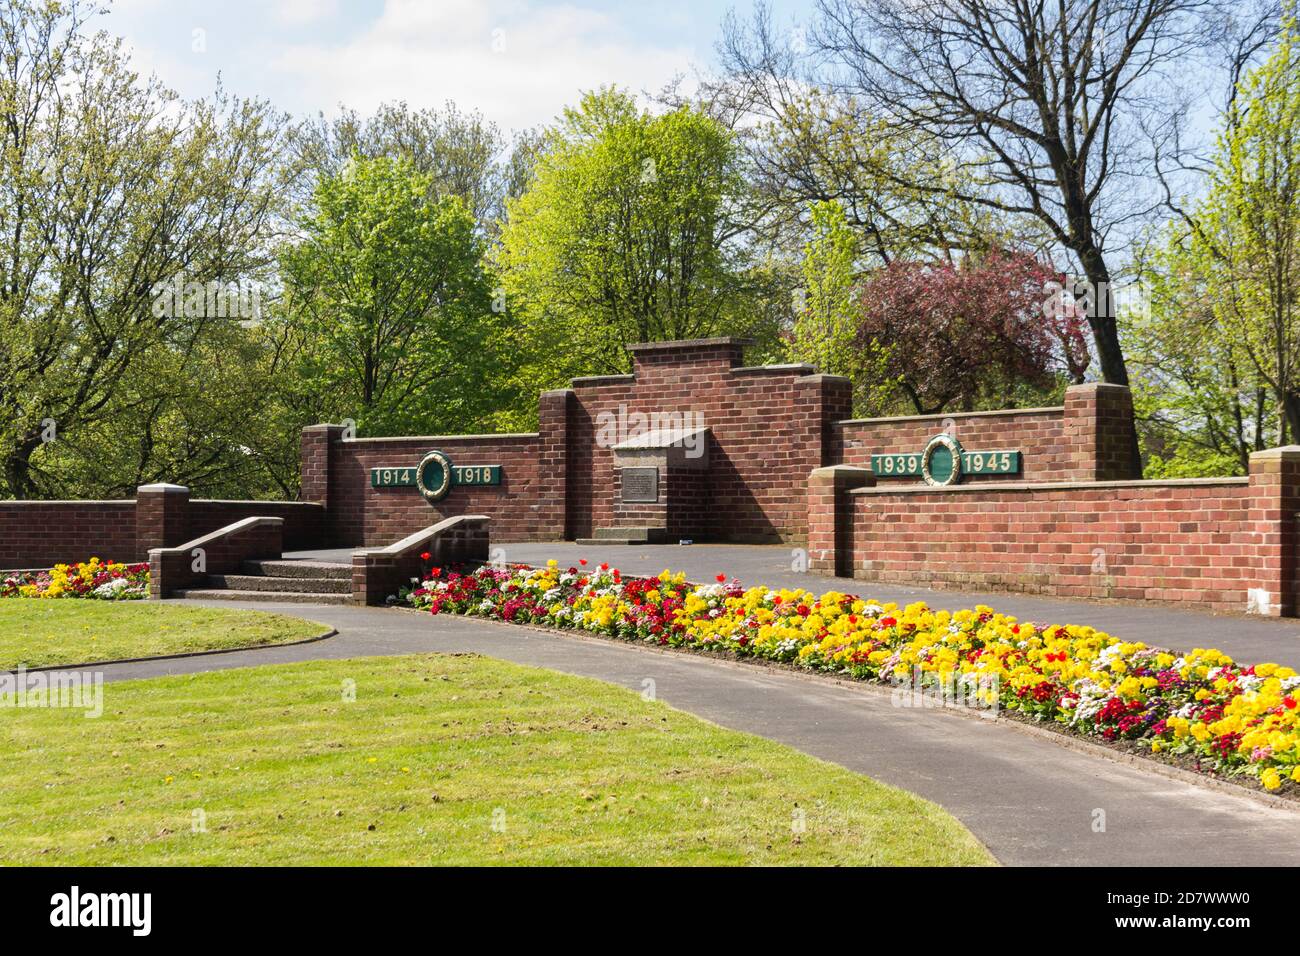 Colourful flower beds in the Garden of Remembrance war memorial in Farnworth Central Park, Bolton, Greater Manchester. Stock Photo